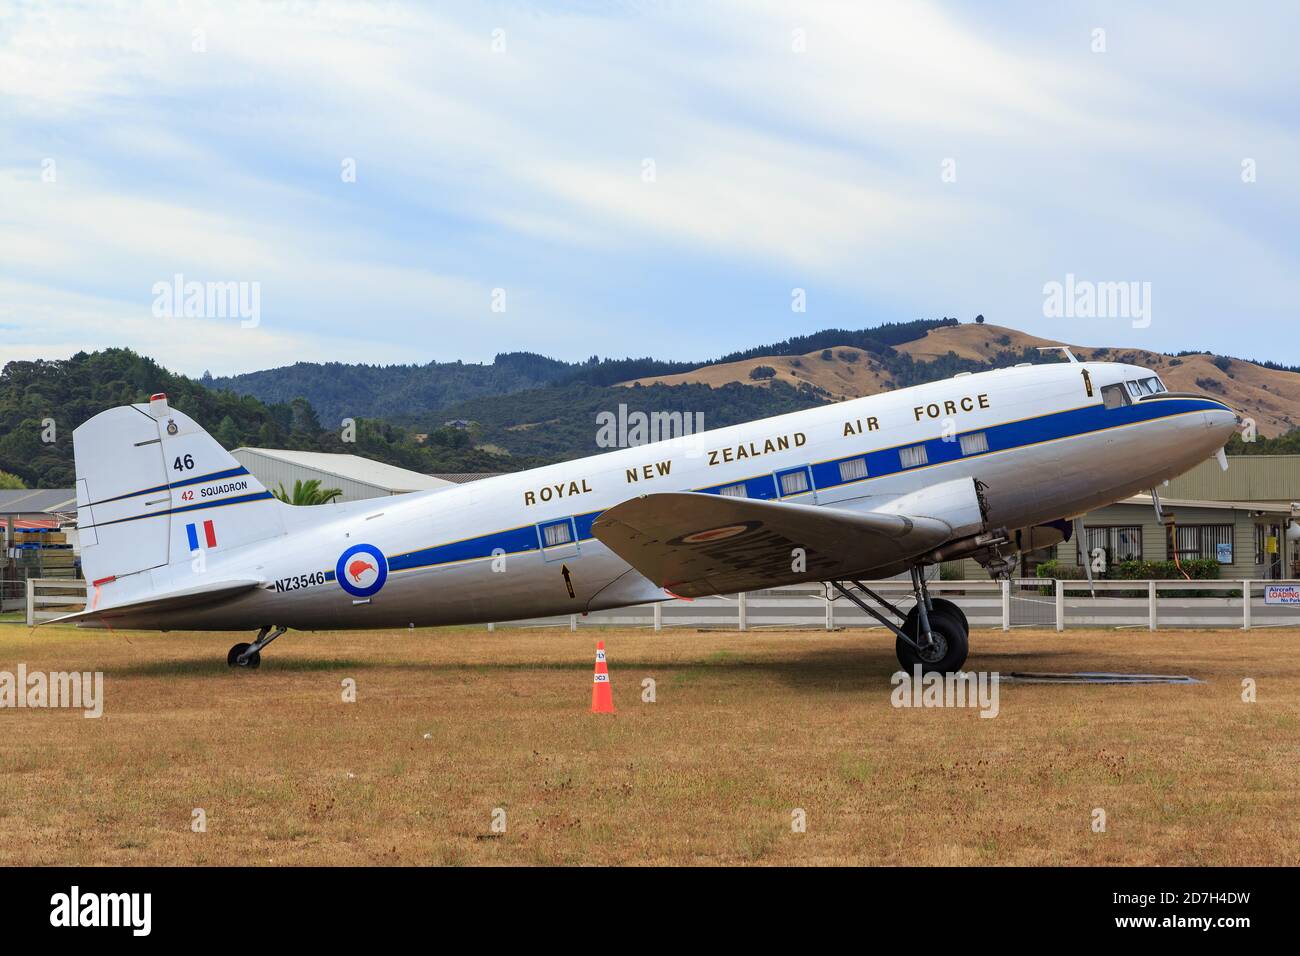 A 1940s Douglas DC-3 airplane painted in Royal New Zealand Air Force colors. Whitianga, New Zealand, February 4 2020 Stock Photo